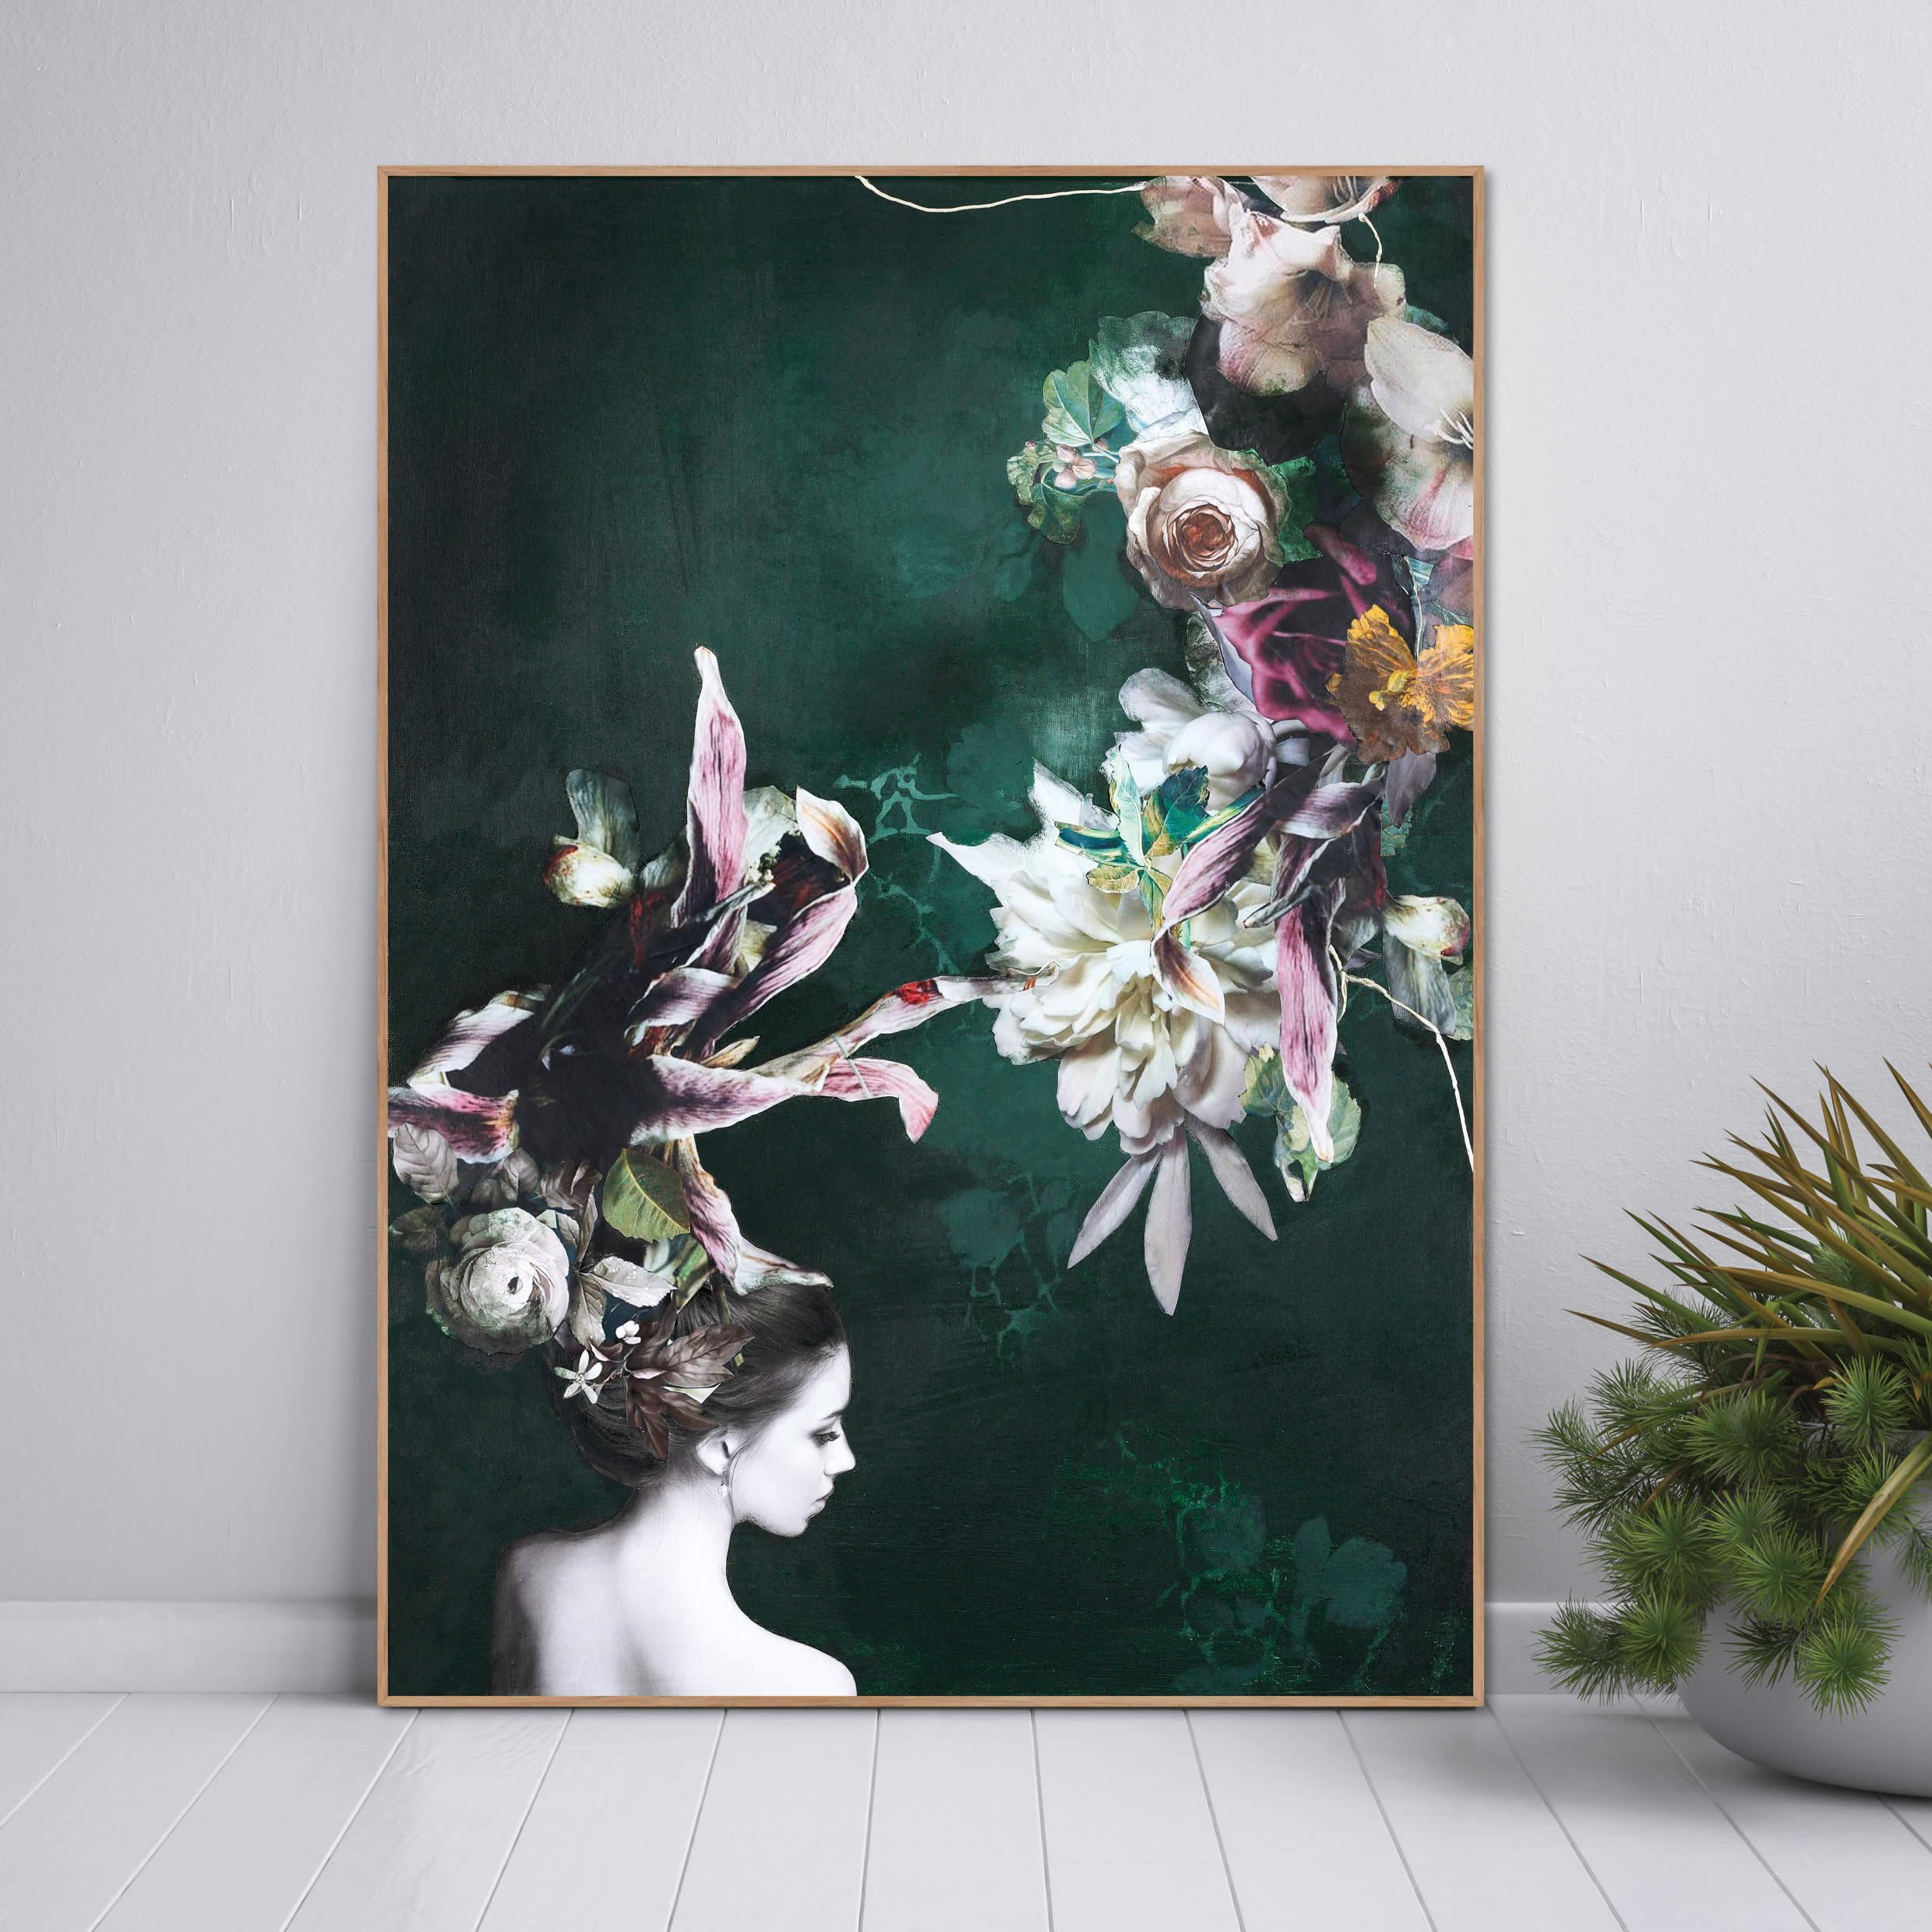 Haute couture 6 | FRAMED PRINT